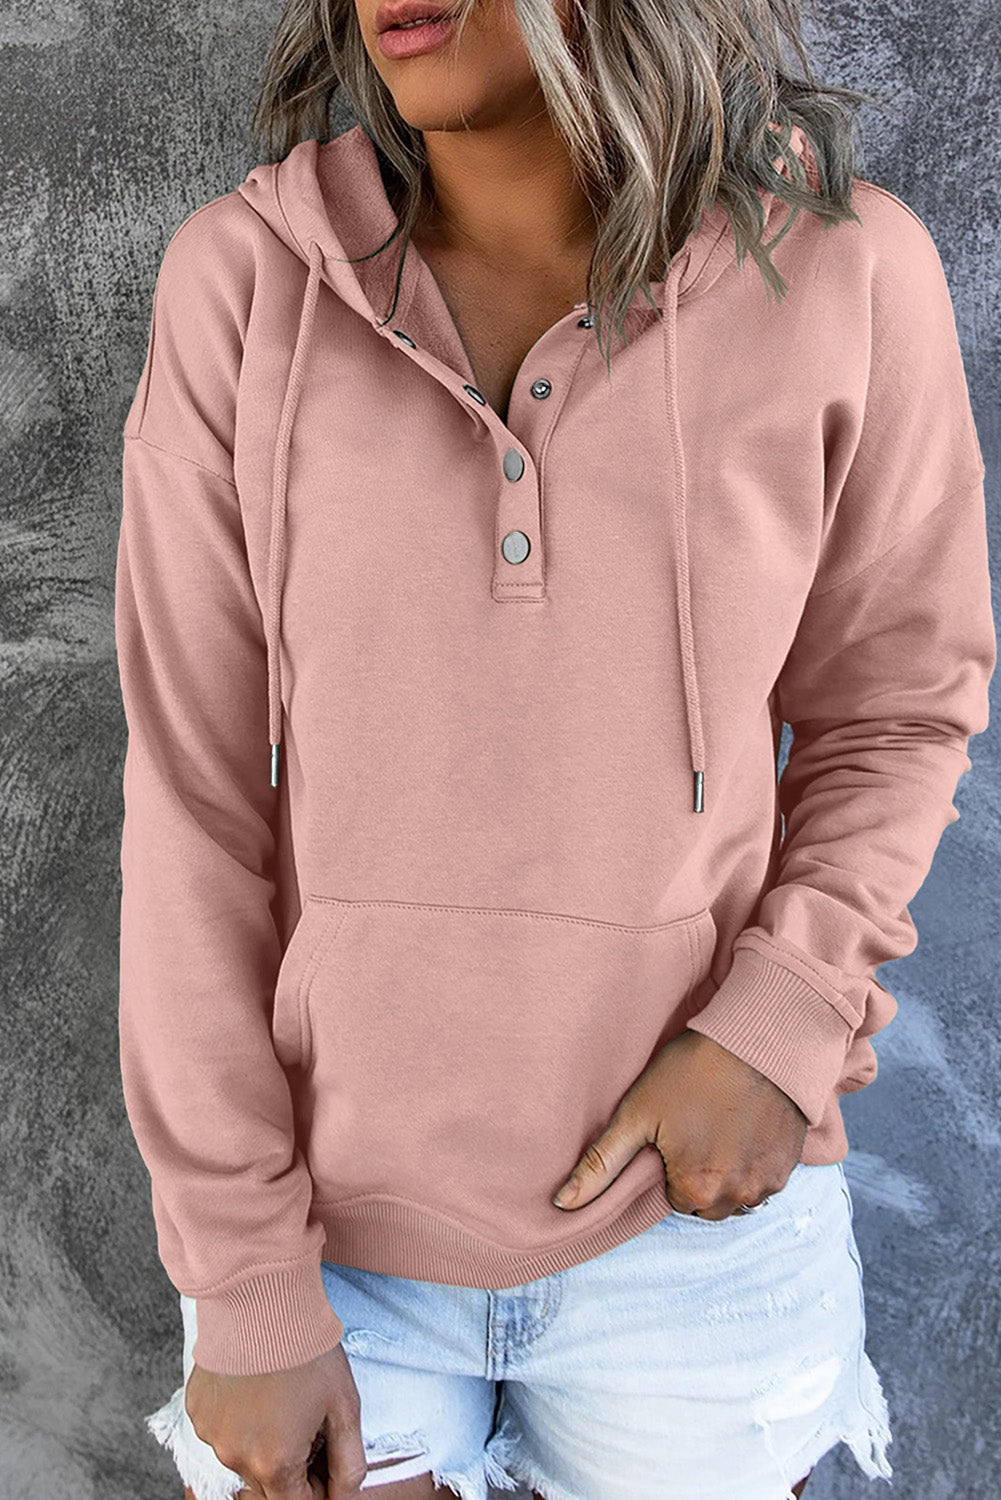 Dropped Shoulder Long Sleeve Hoodie with Pocket - Pink / S - Women’s Clothing & Accessories - Shirts & Tops - 1 - 2024